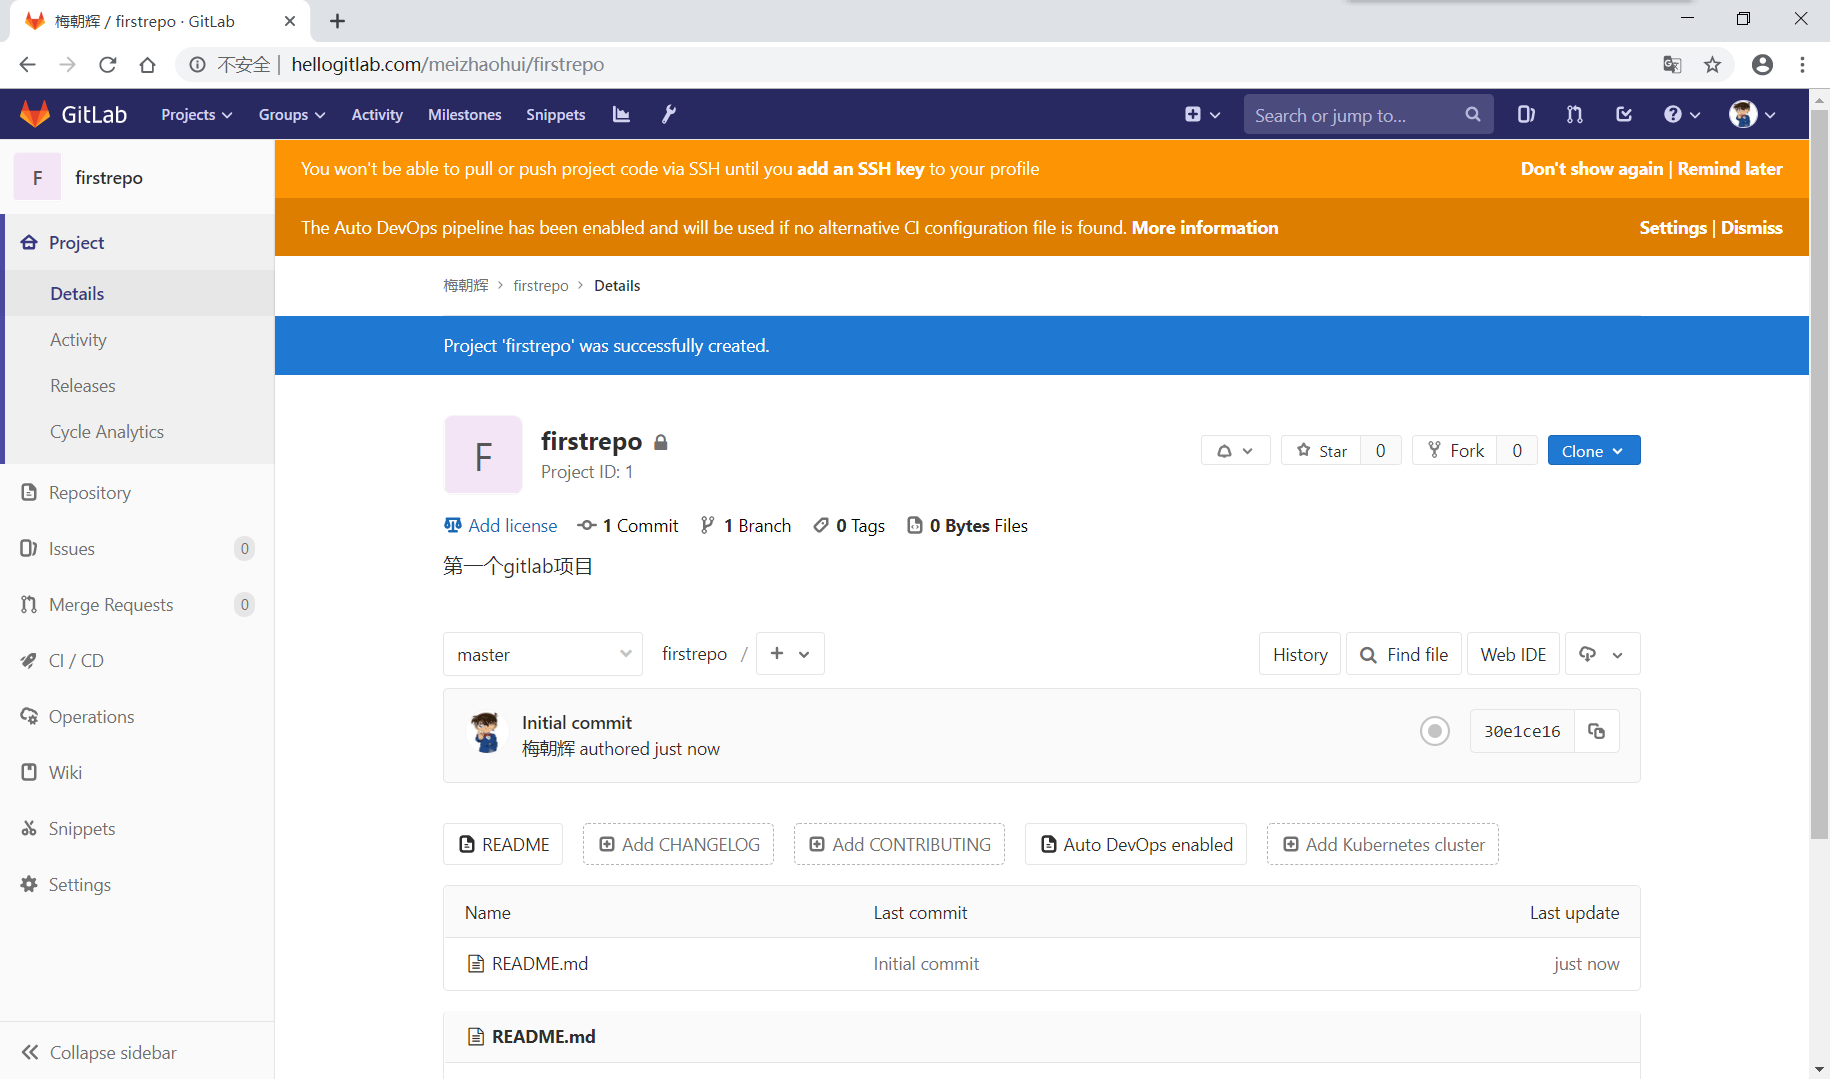 gitlab_domain_new_project_details.png